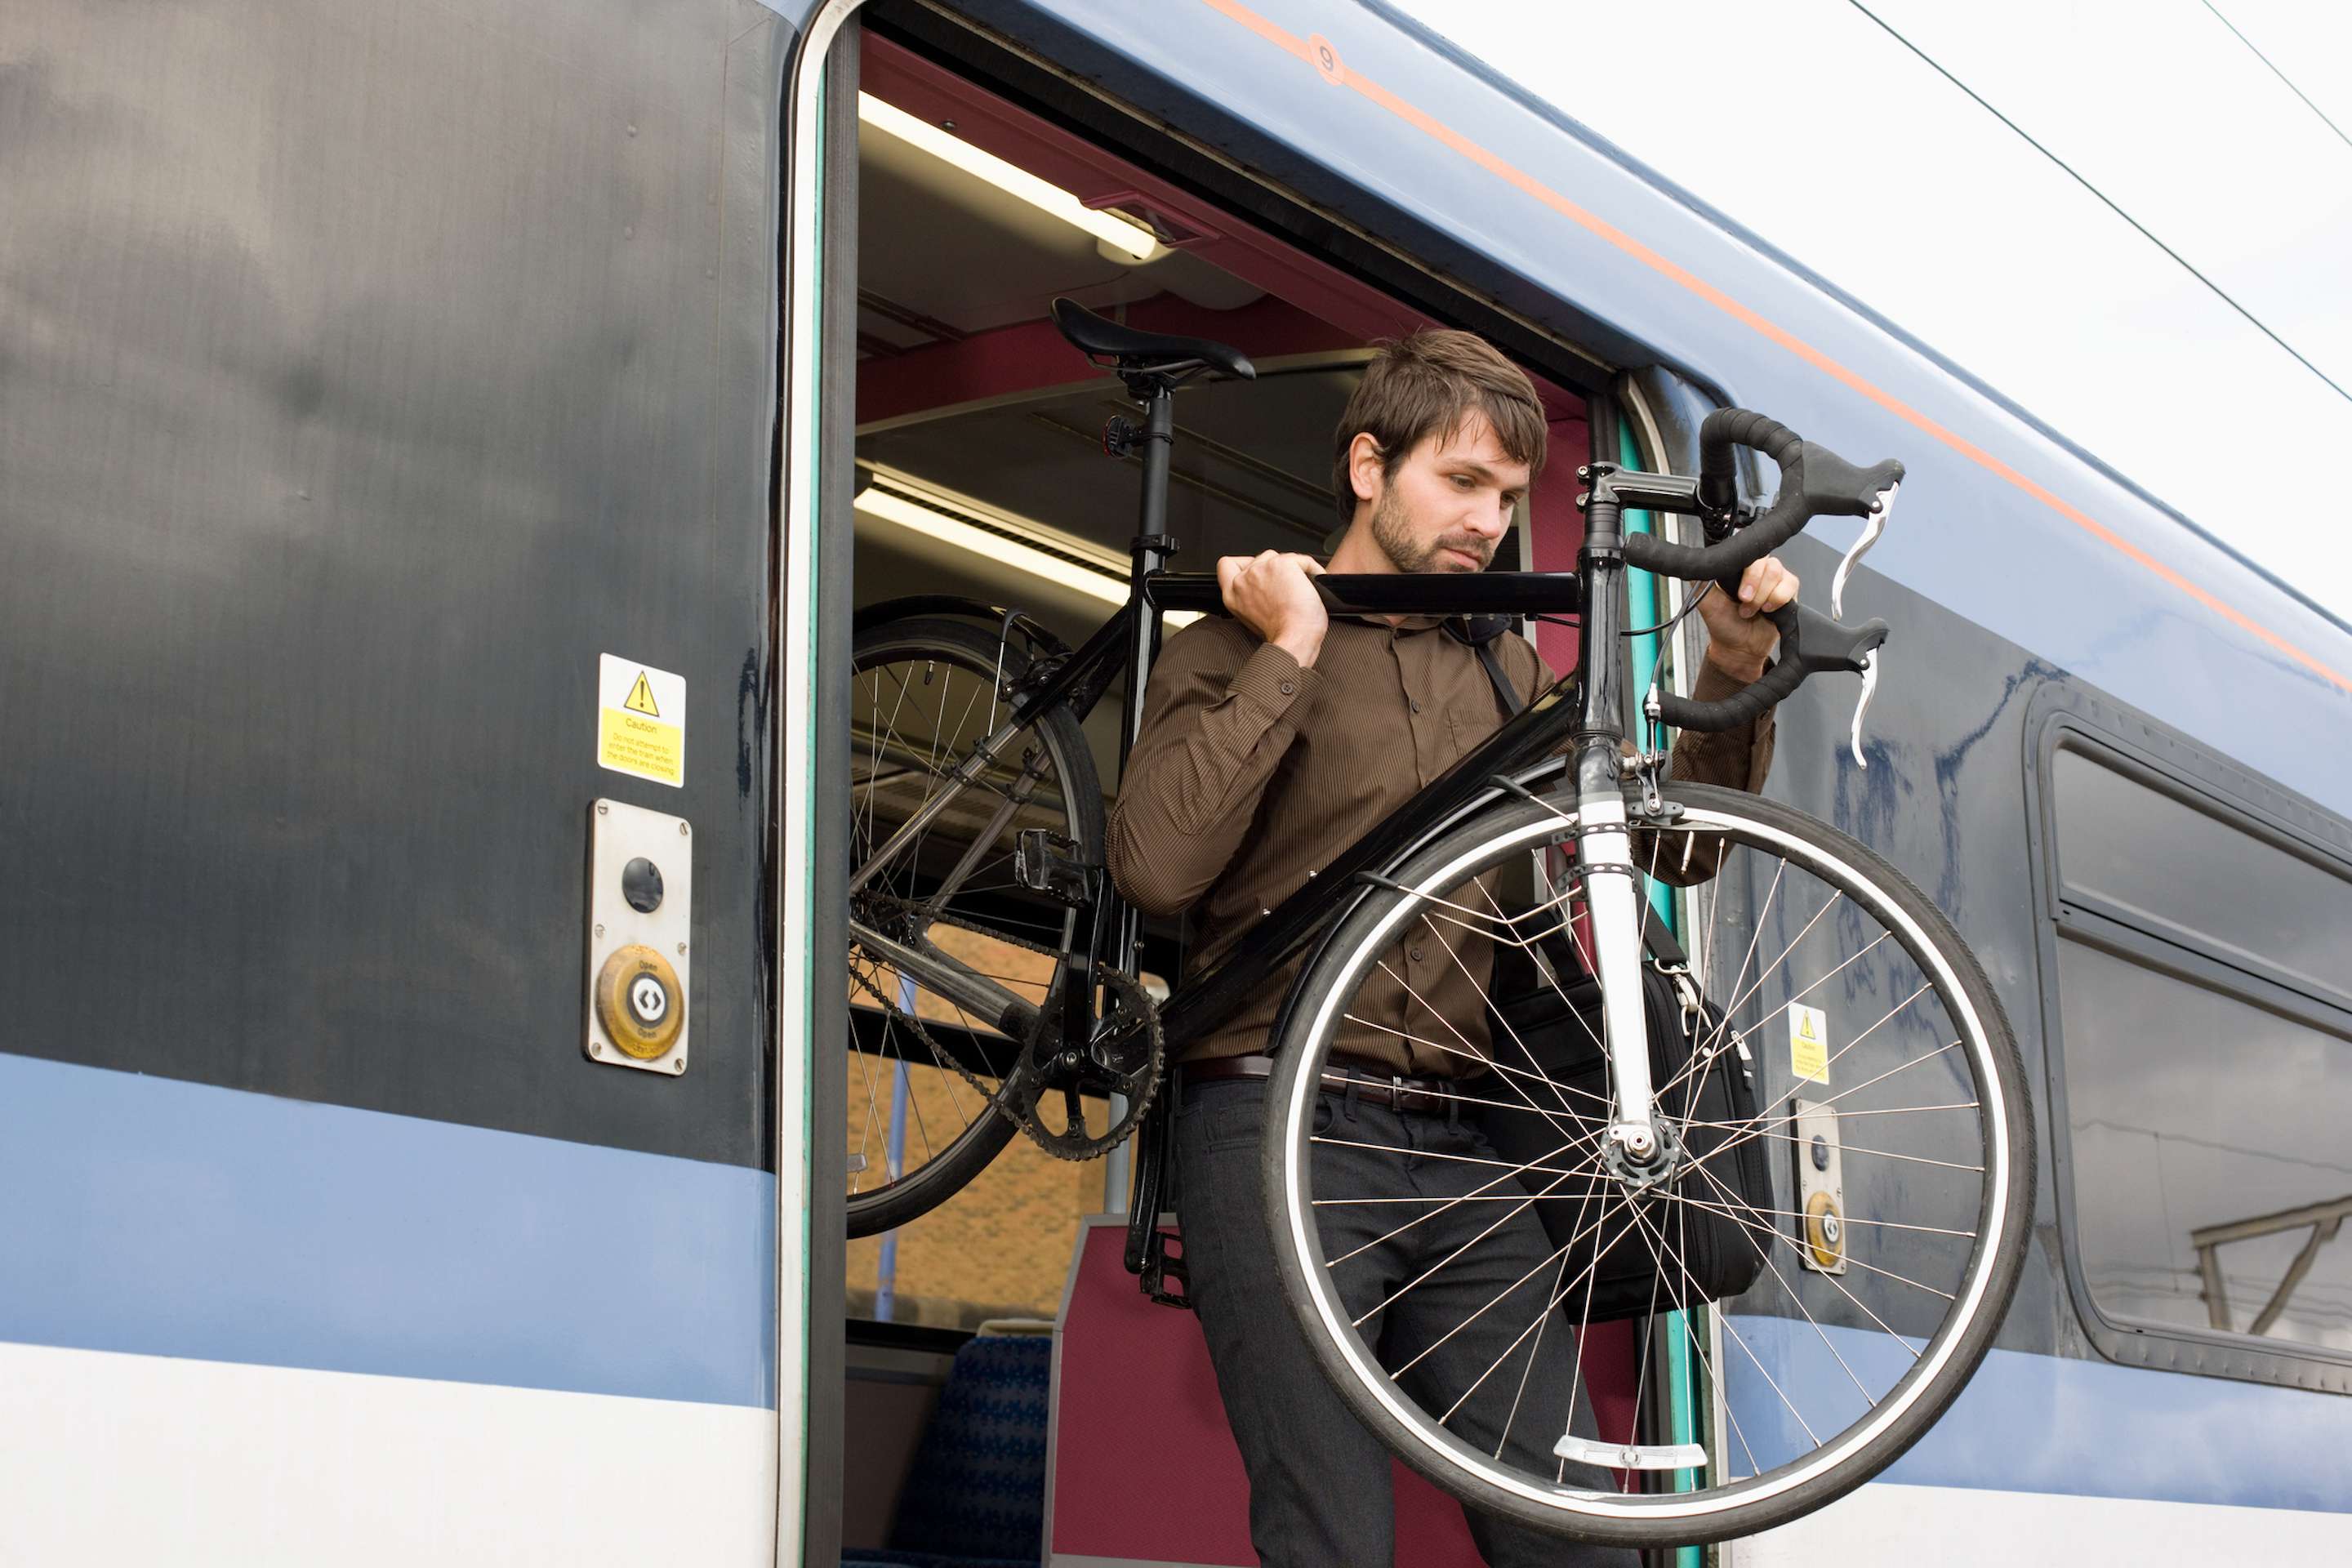 Can I Travel With My Bike On The Train? | Bikes On Trains in the UK |  Trainline